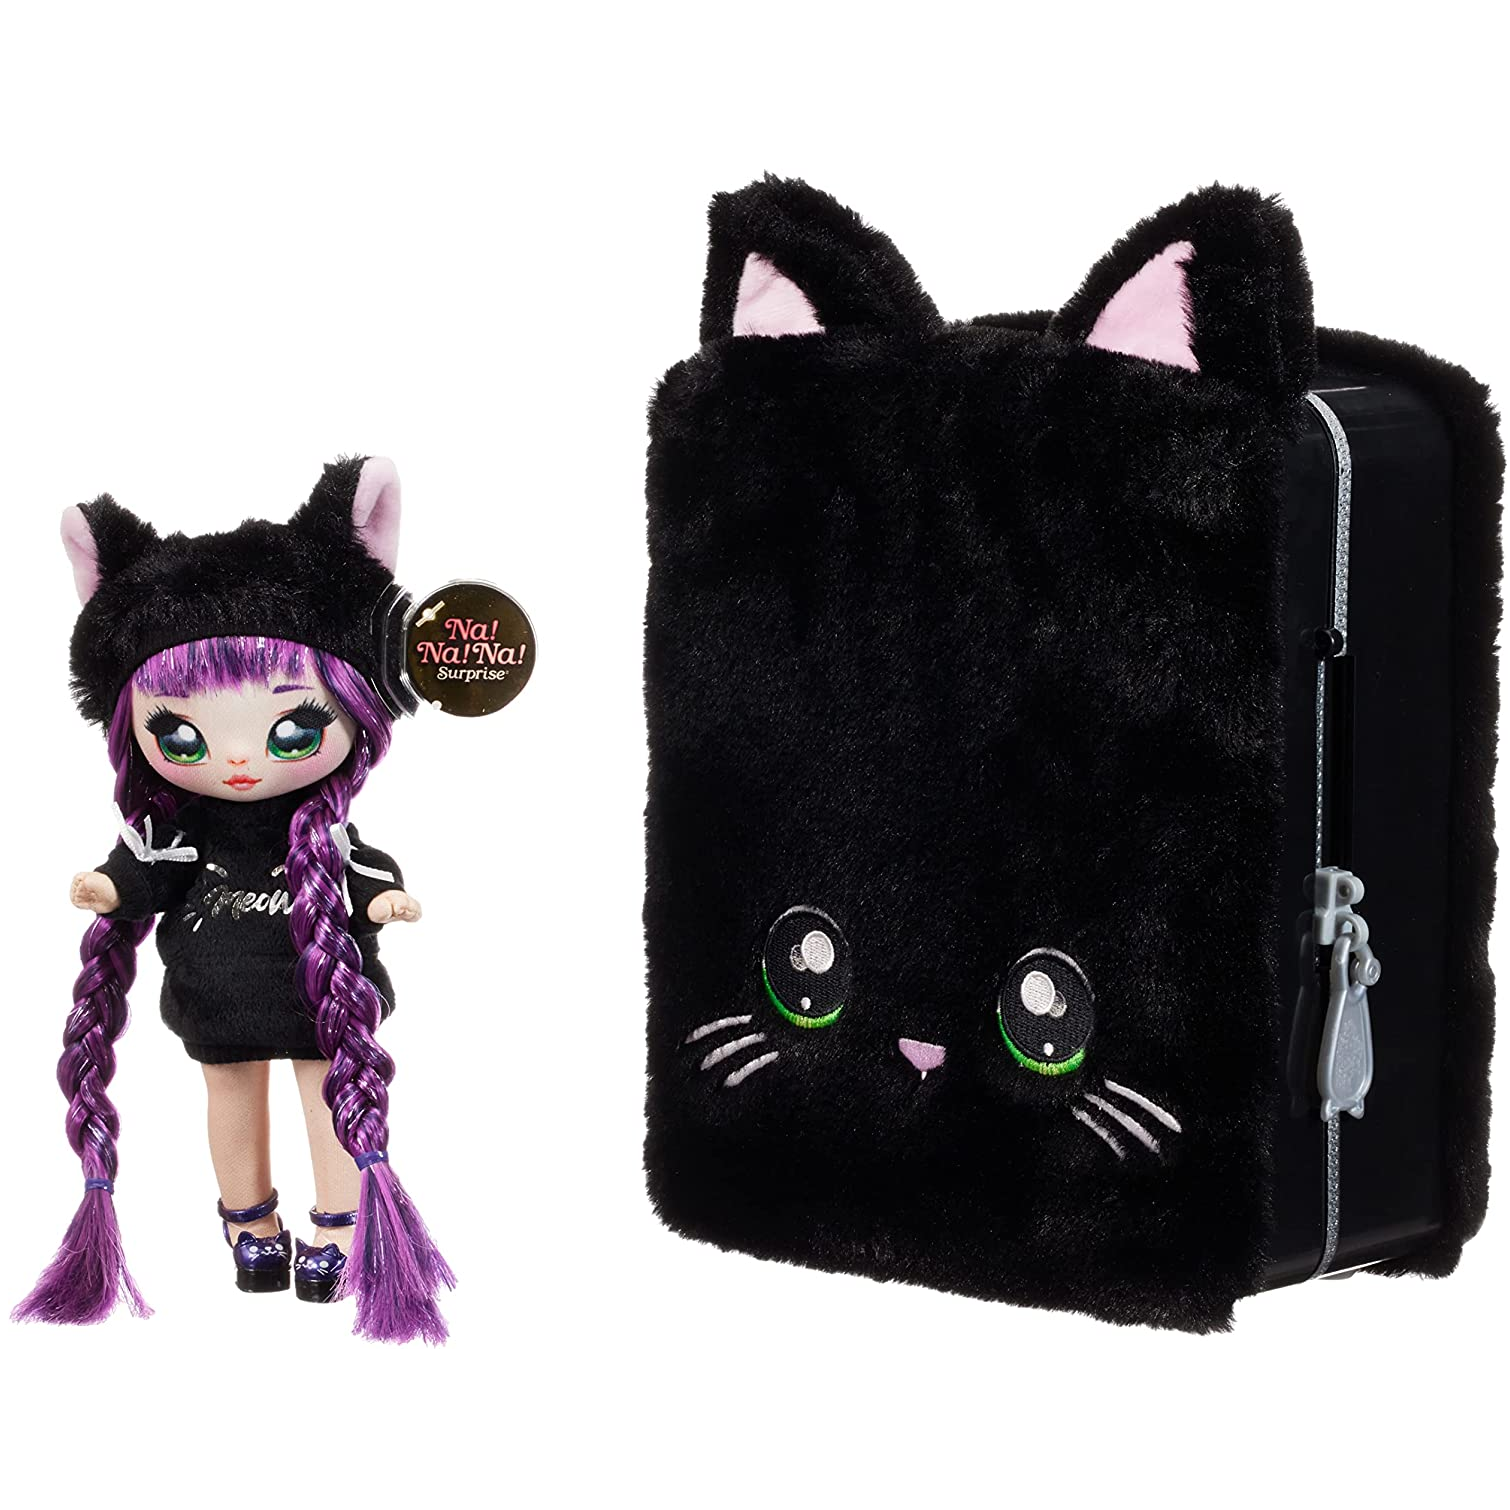 Na! Na! Na! Surprise! 3 in 1 Backpack Bedroom Tuesday Meow